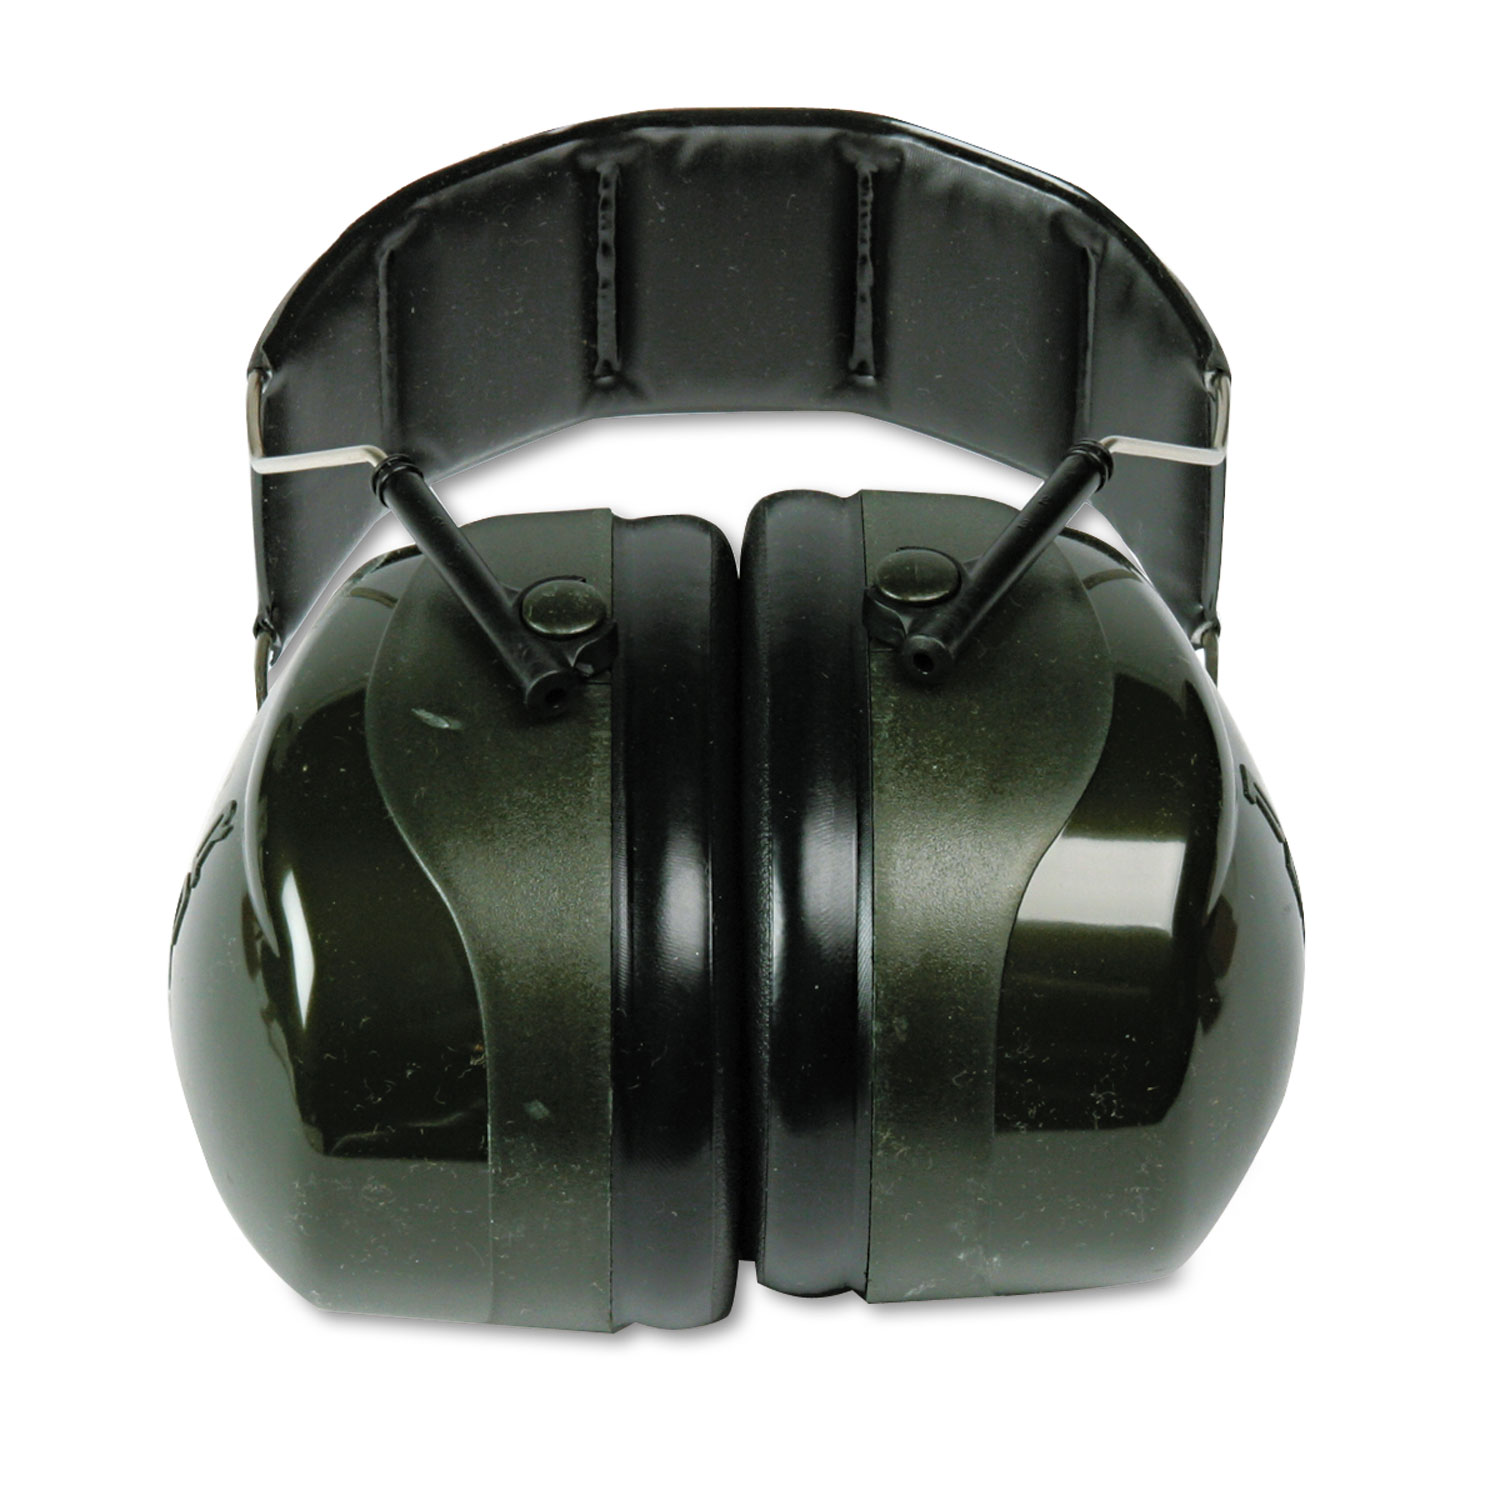  3M 7000009669 Peltor H7A Deluxe Ear Muffs, 27 dB Noise Reduction (MMMH7A) 